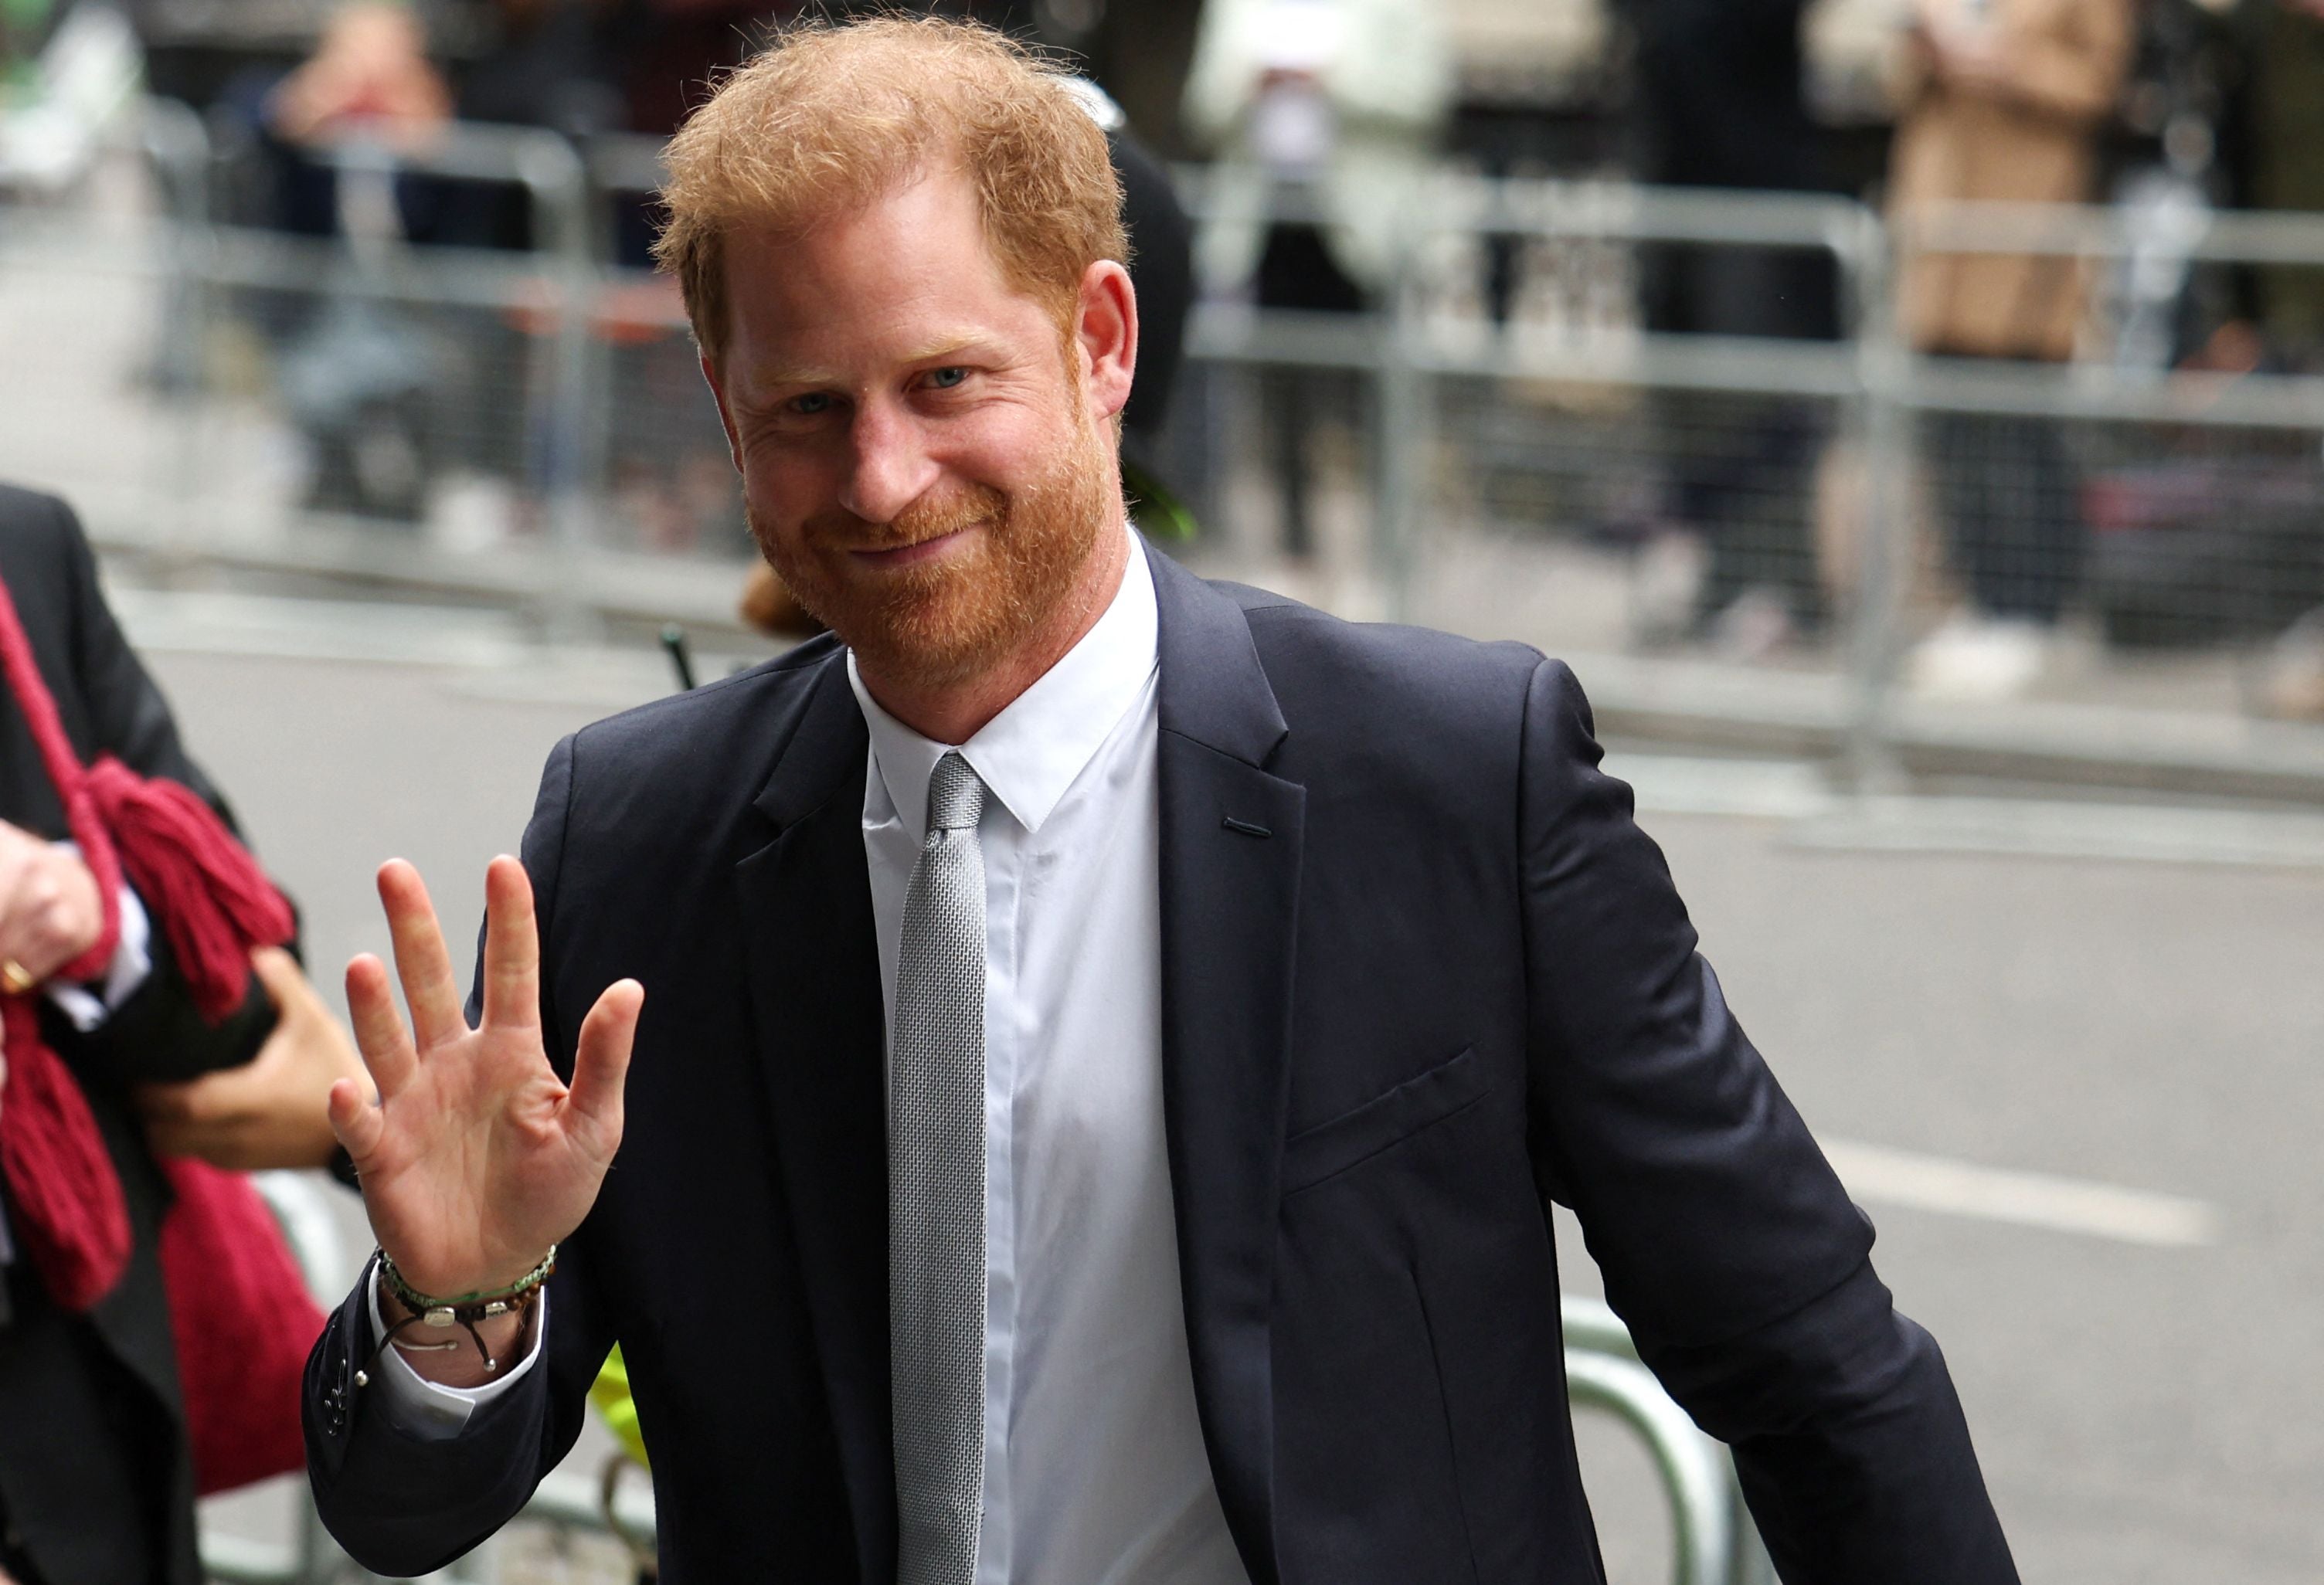 Prince Harry, Duke of Sussex, waves as he arrives to the Royal Courts of Justice, Britain's High Court, in central London on June 7, 2023